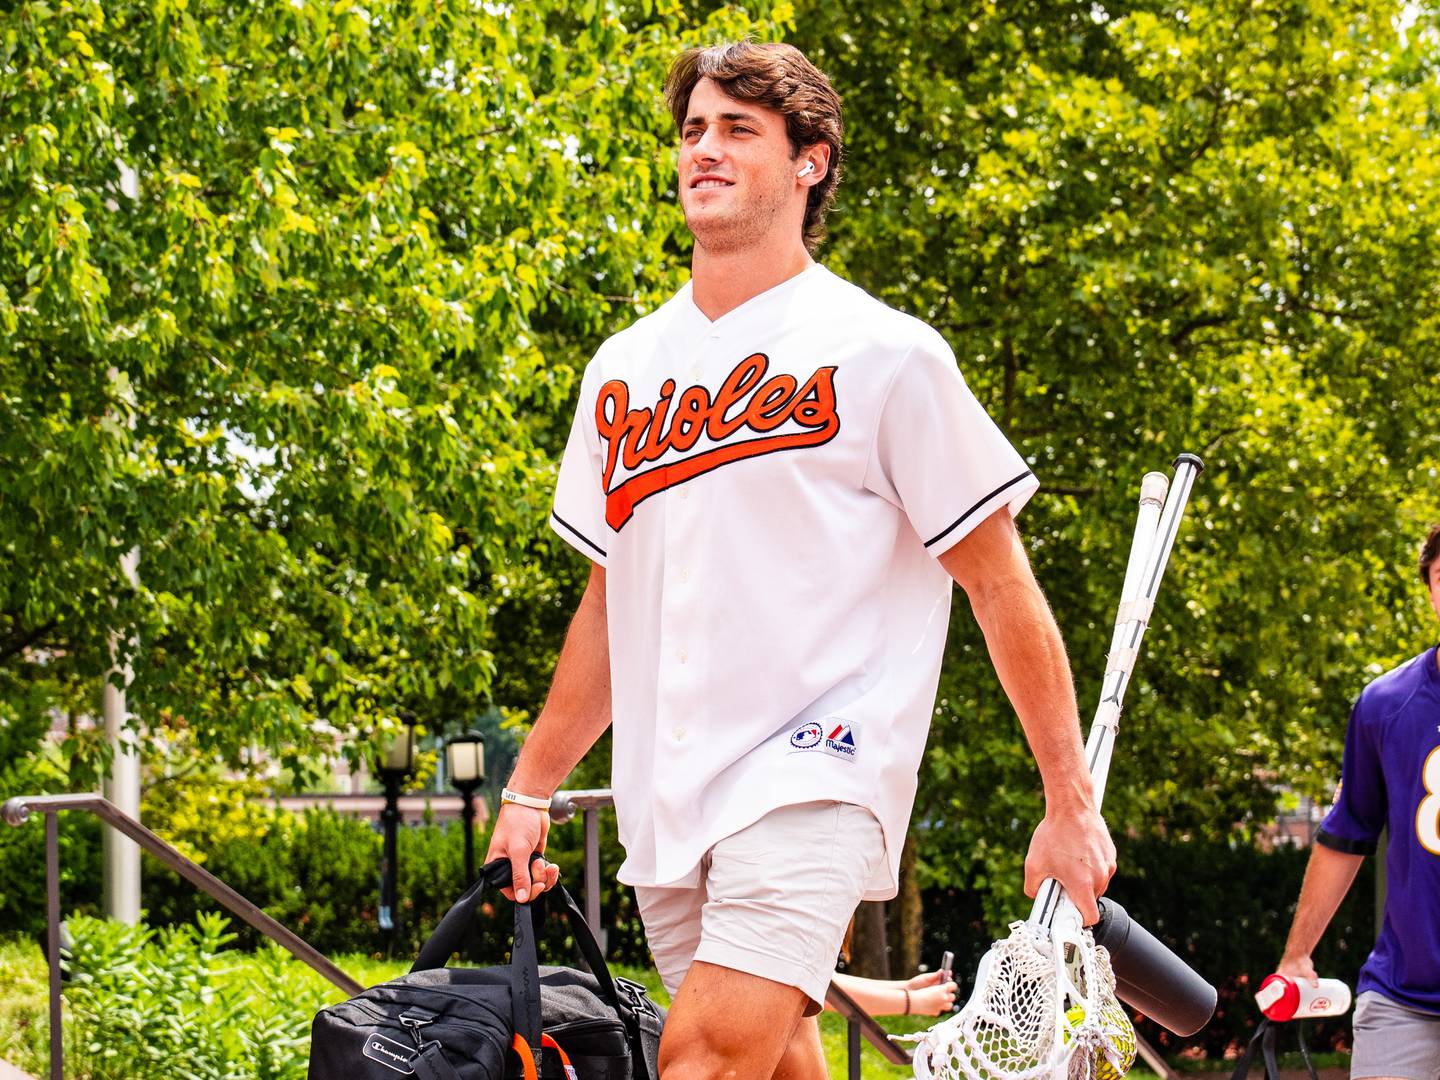 This photo shoes a lacrosse player holding equipment and wearing and Orioles jersey walking along a brick-lined path.